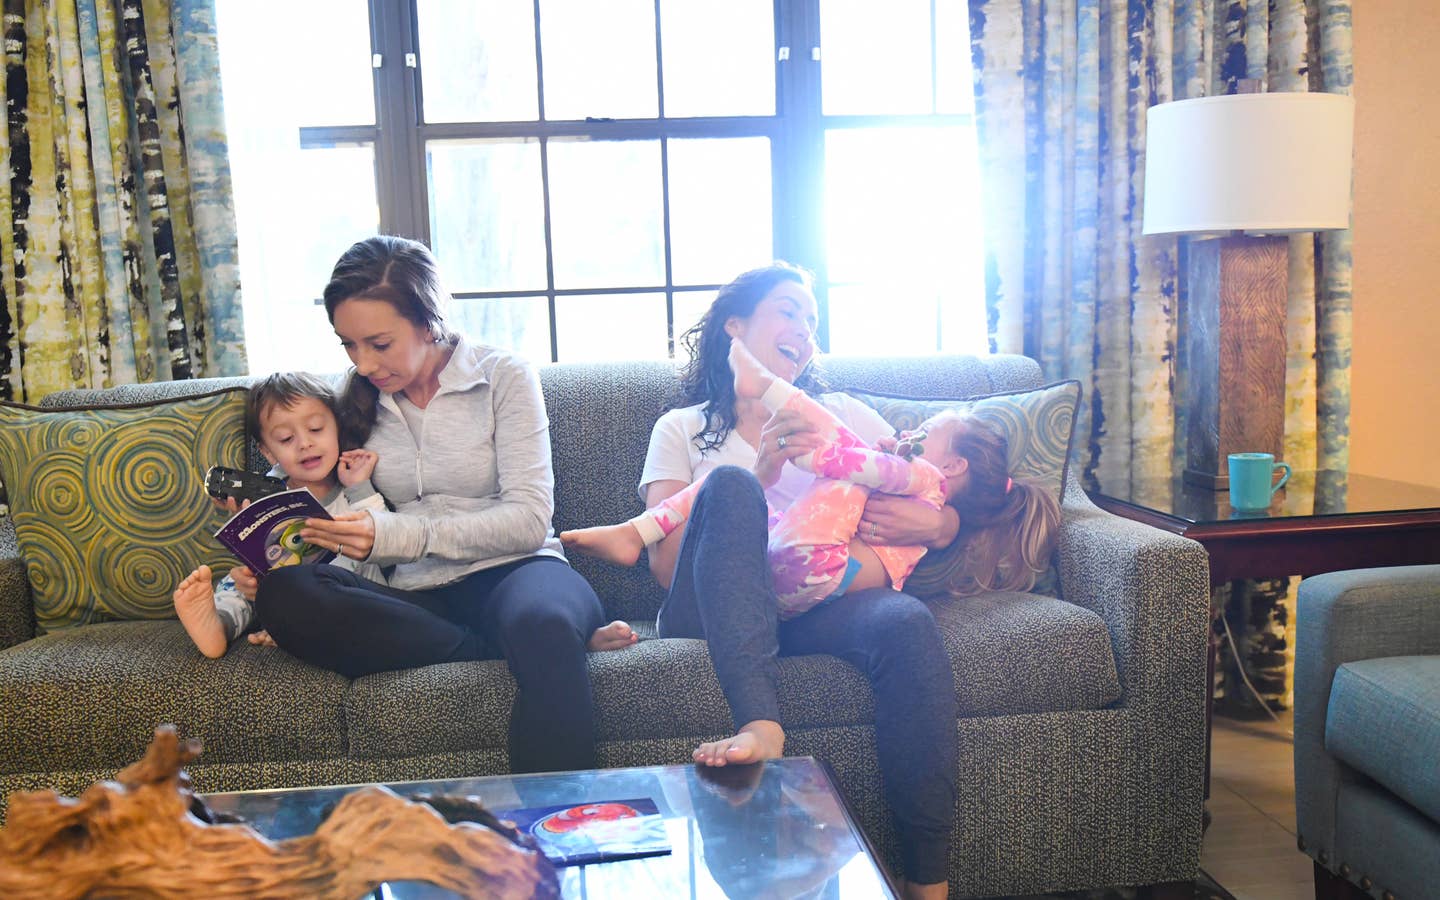 Family reading and laughing on a sofa